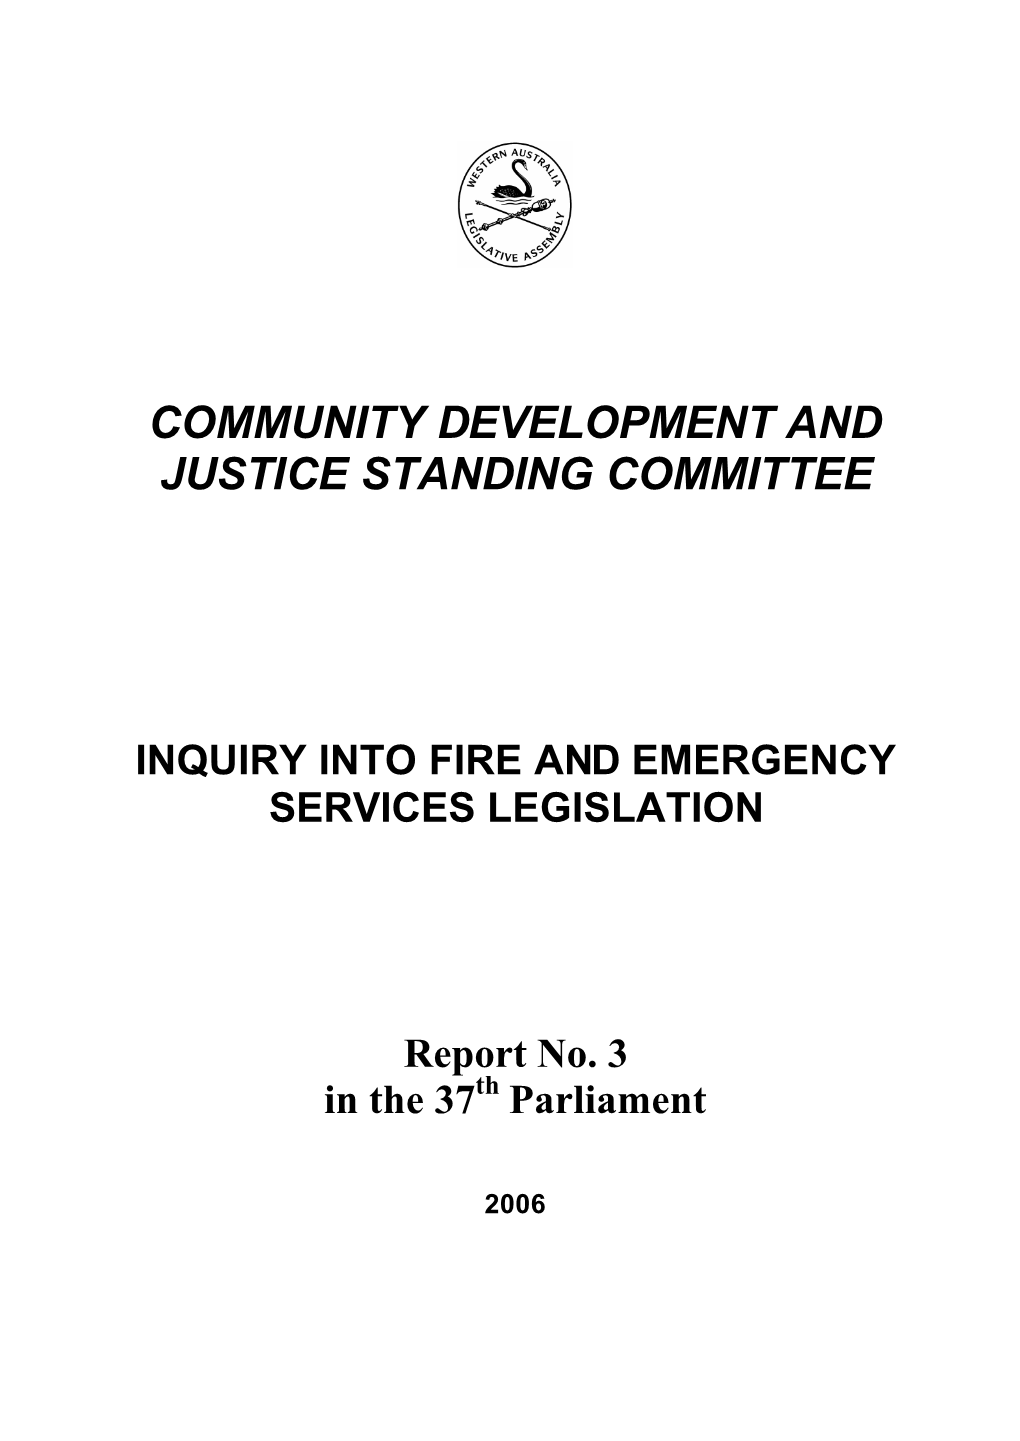 Inquiry Into Fire and Emergency Services Legislation